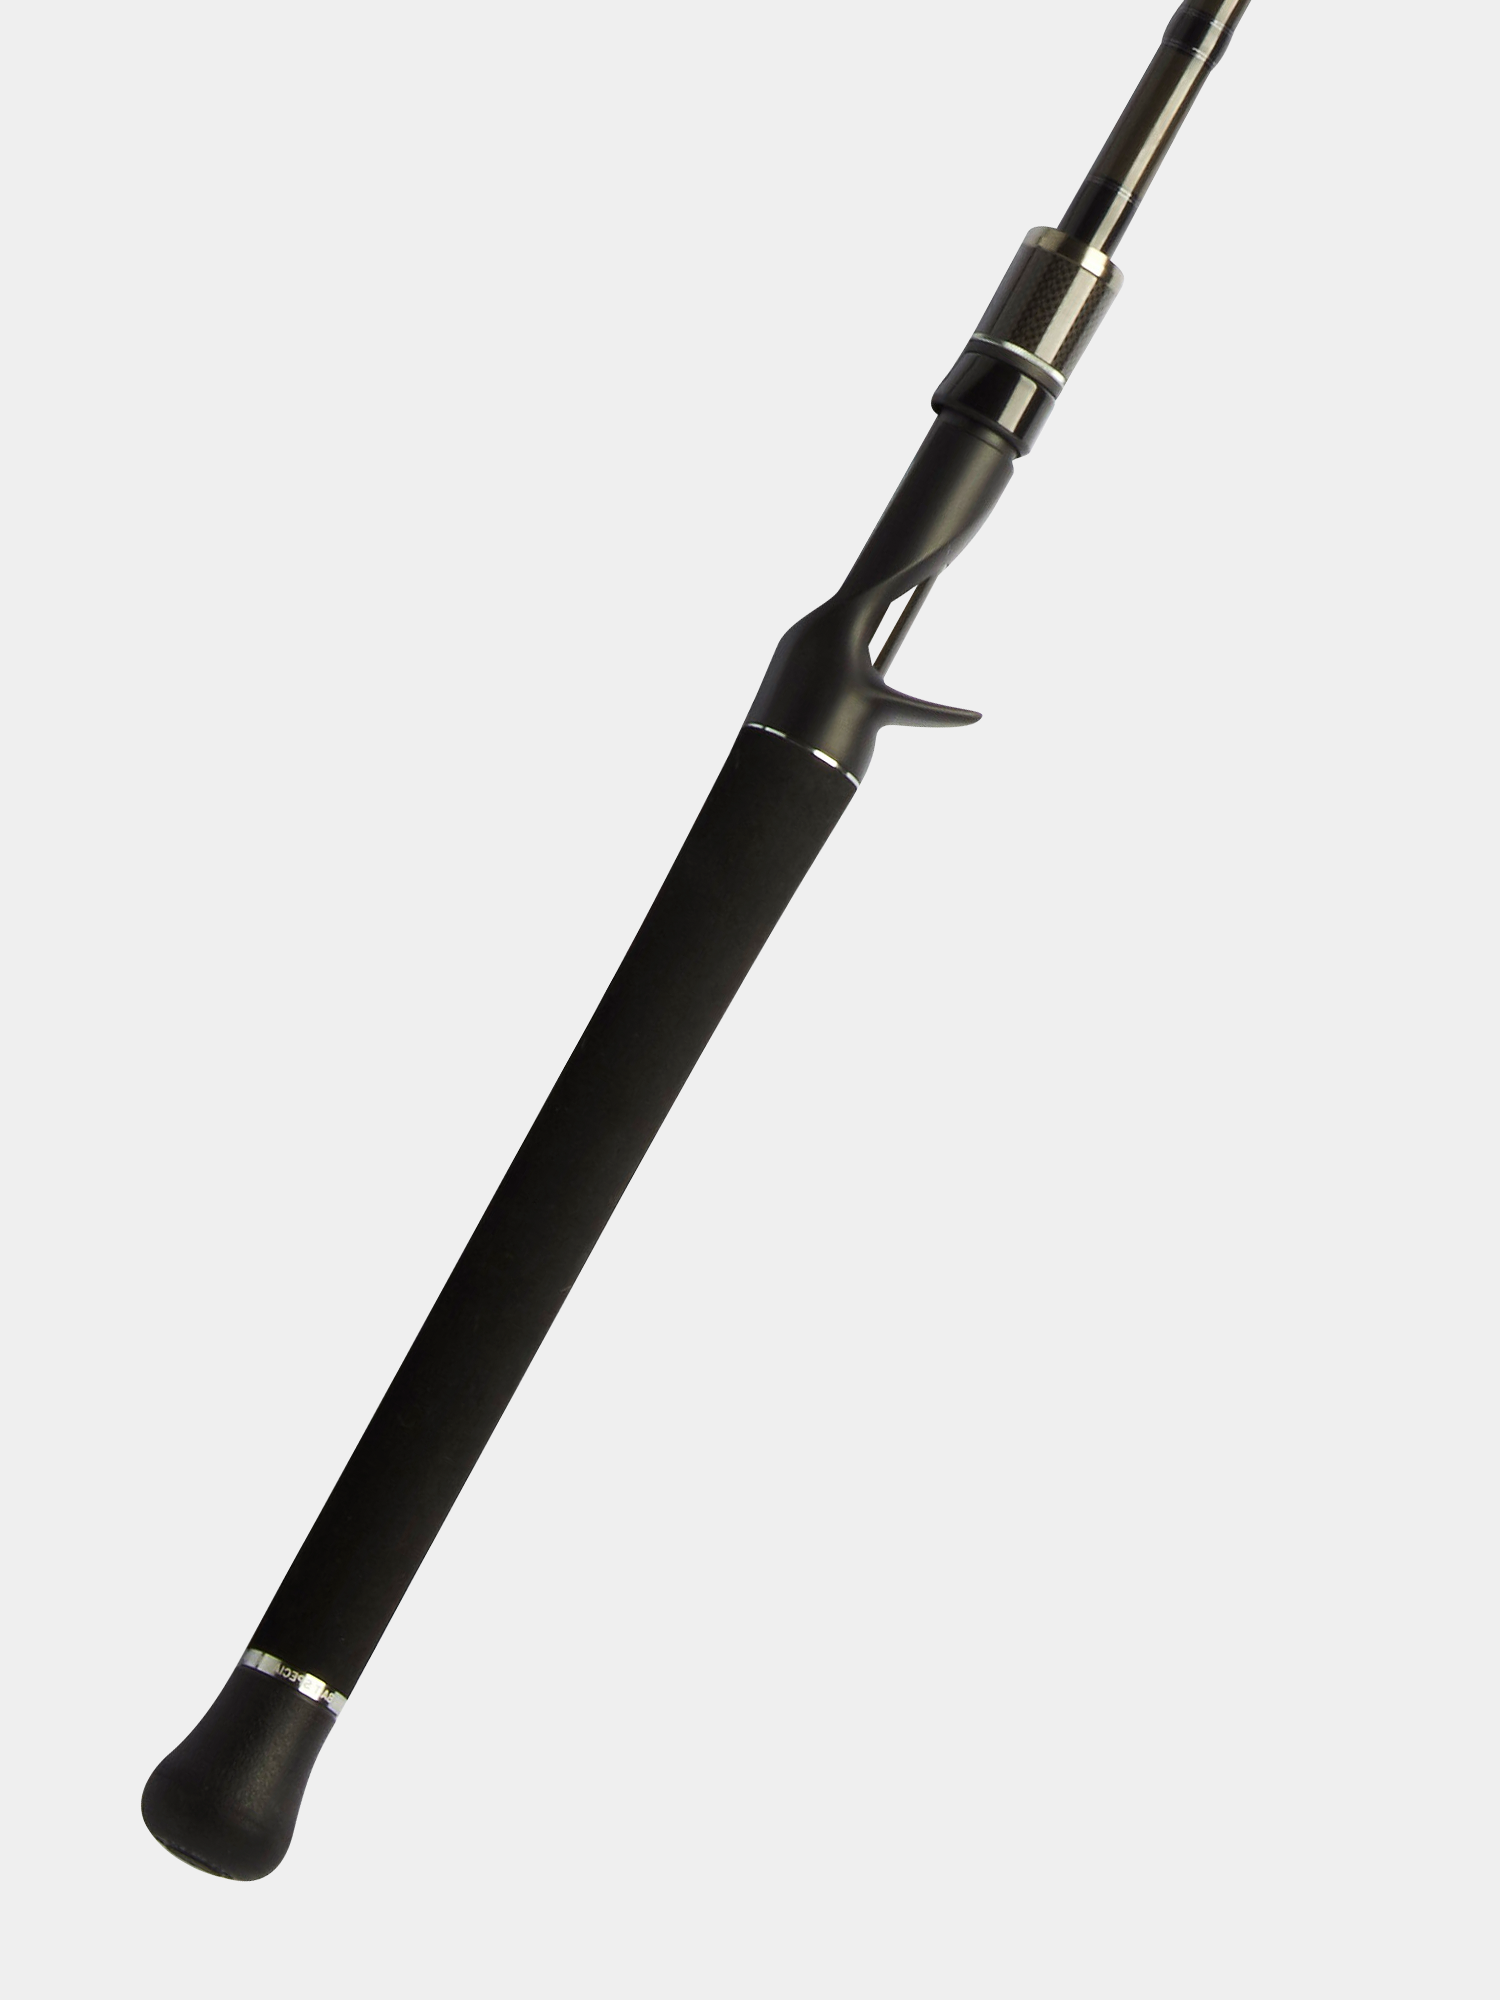 WILD SIDE 7'5” Big Bait Special Casting Rod by Arundel Tackle